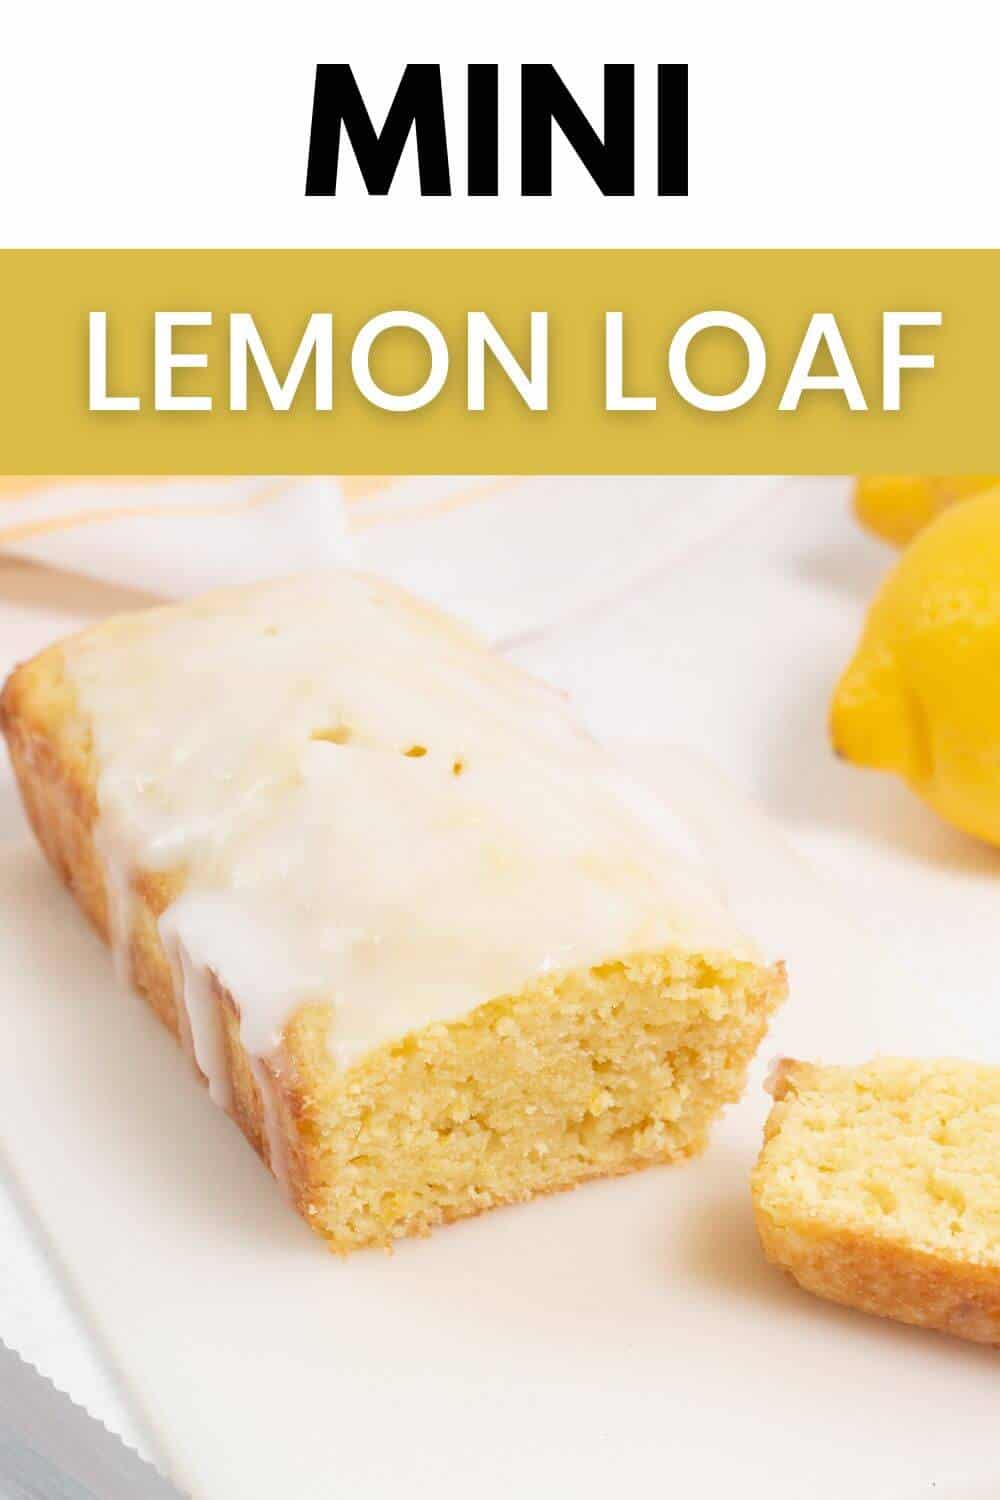 Mini lemon loaf with text.